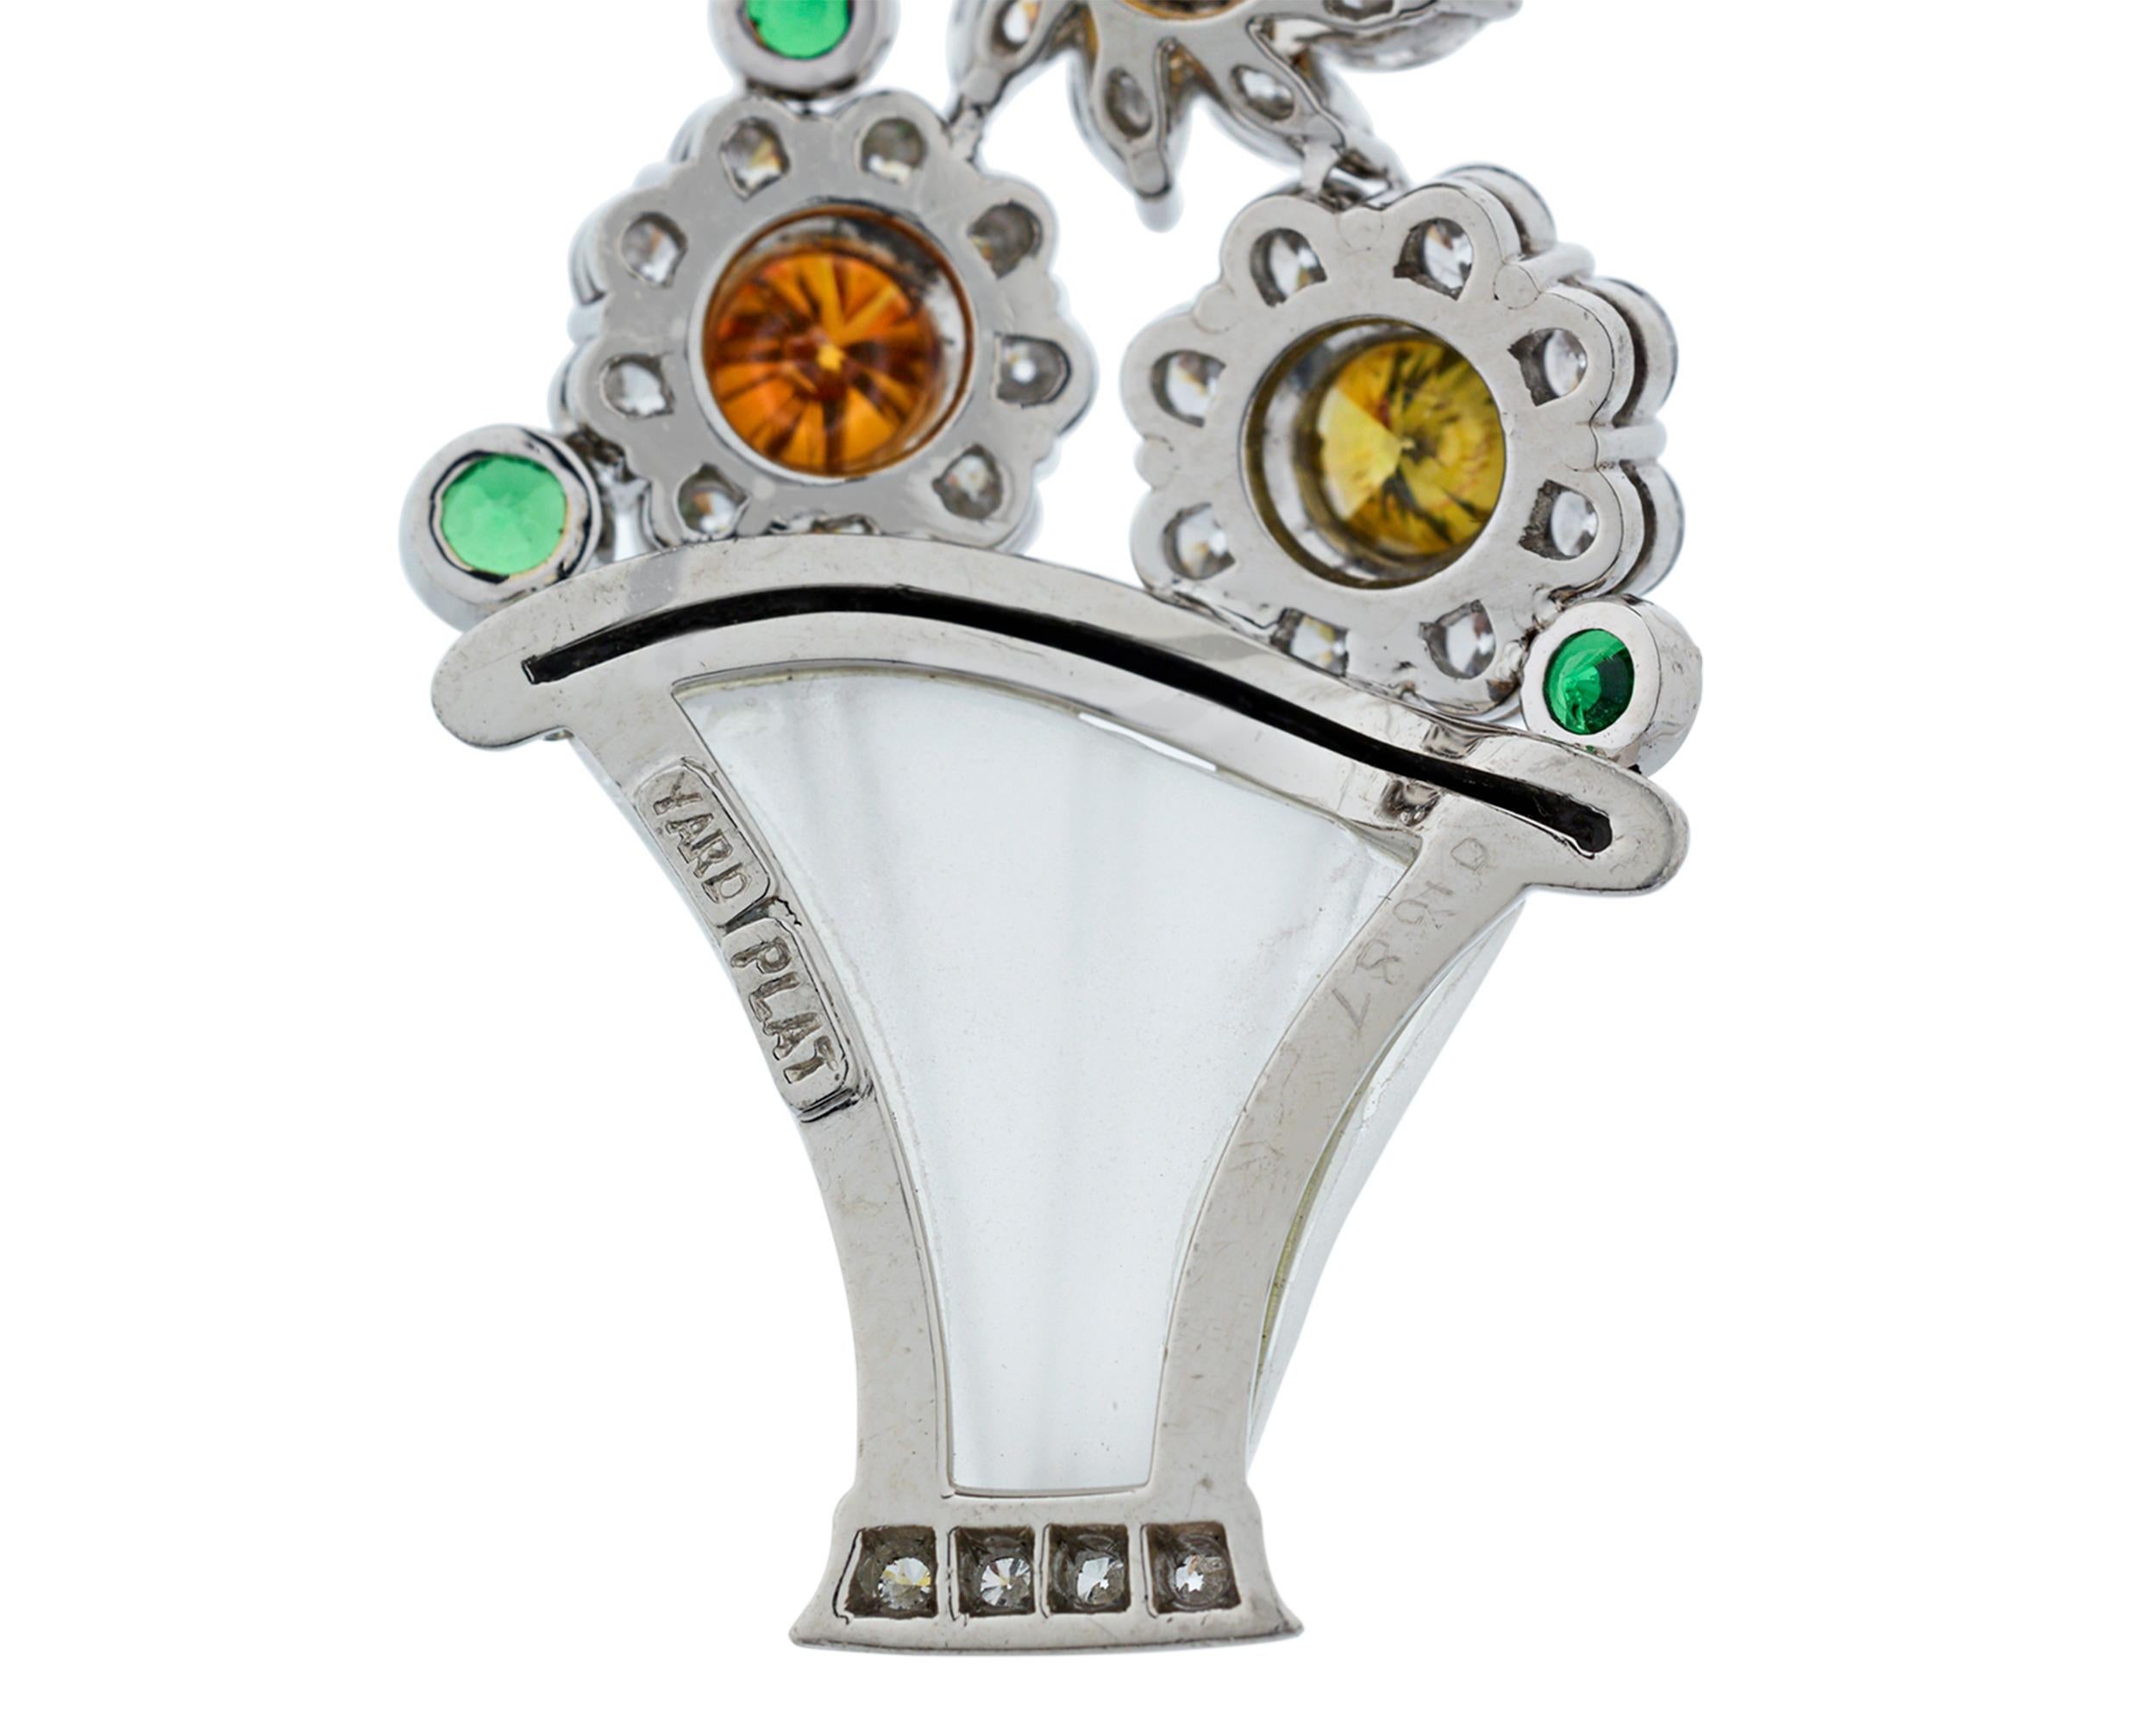 These majestic Raymond Yard earrings feature brilliant springtime baskets of flowers bursting with the dazzling hues of natural fancy colored diamonds. The diamonds display vivid shades of yellow and orange, while bright green tsavorite garnets add